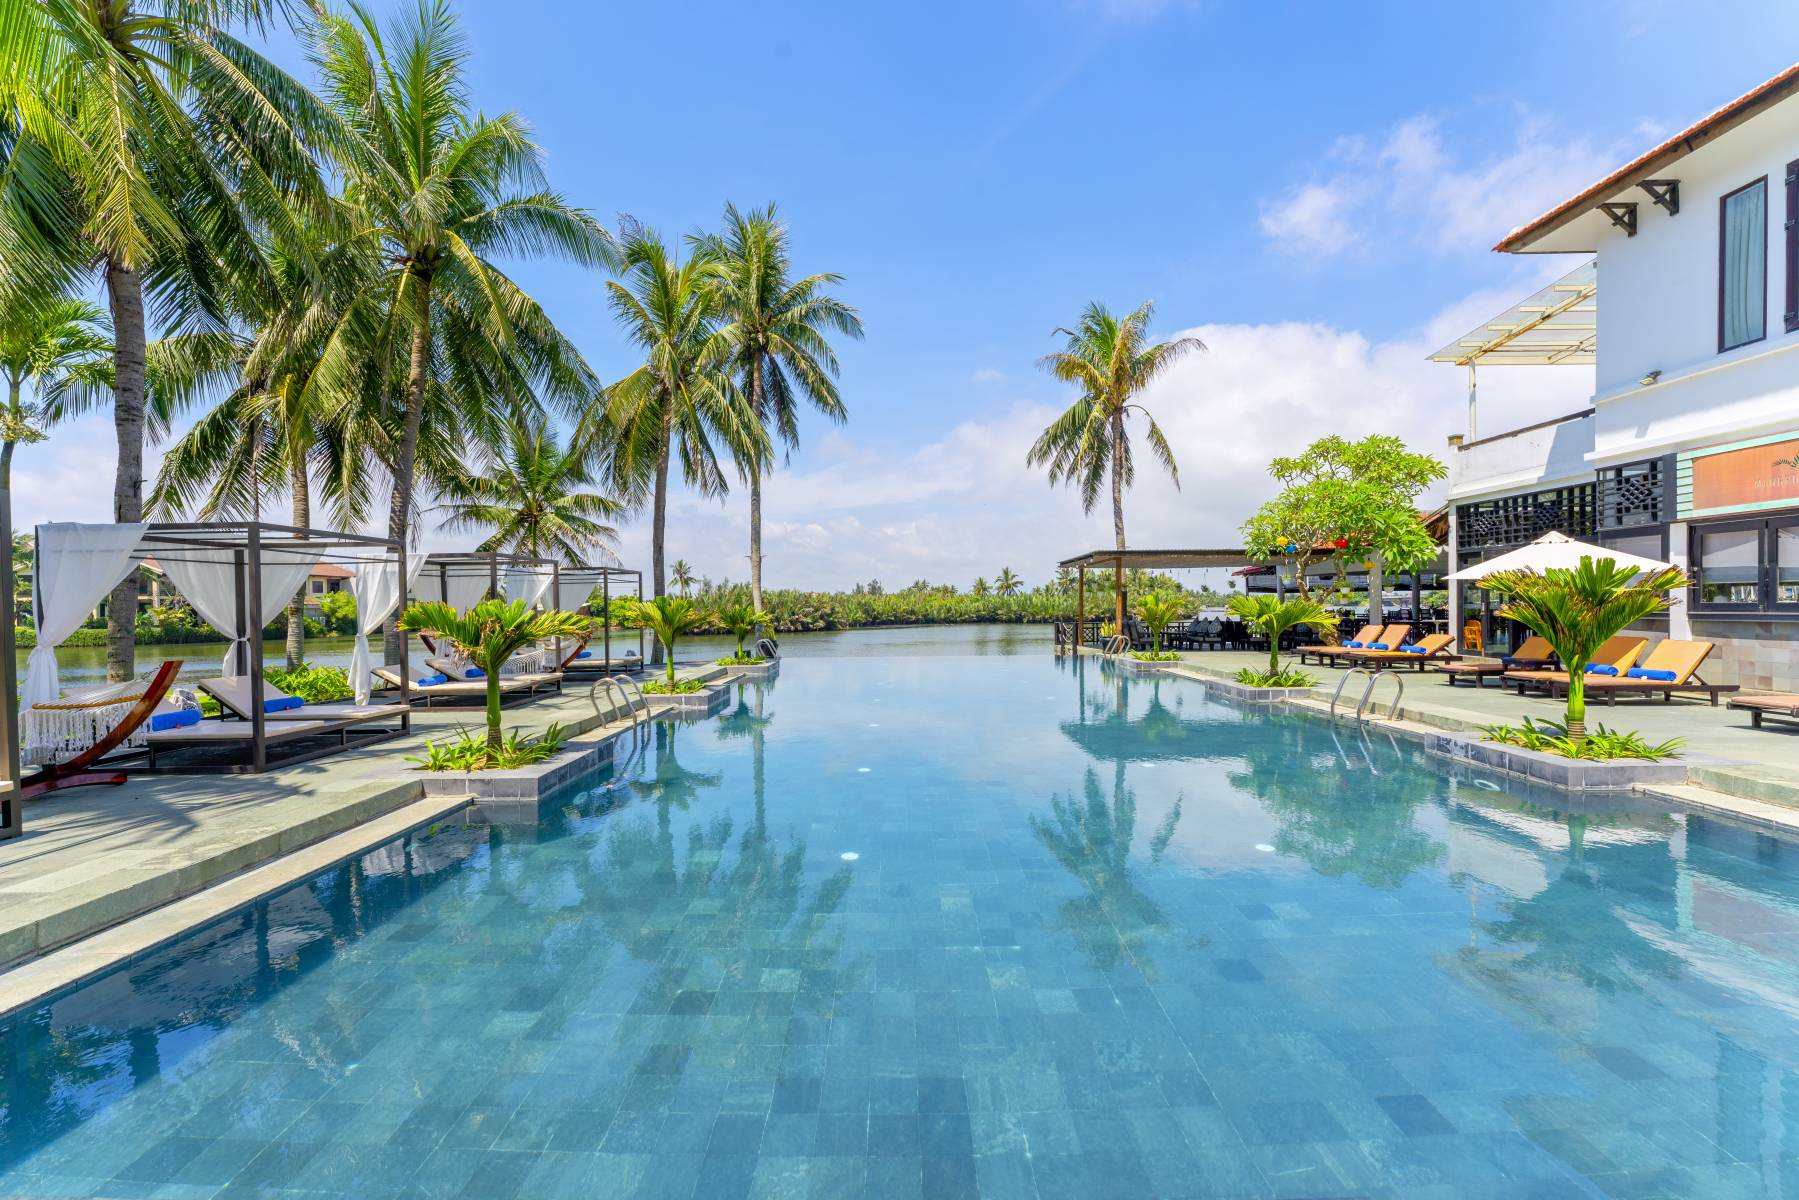 Large pool surrounded by tall palm trees and sun loungers on a bright sunny day. Your second destination, the Hoi An Beach Resort in this Vietnam holiday package